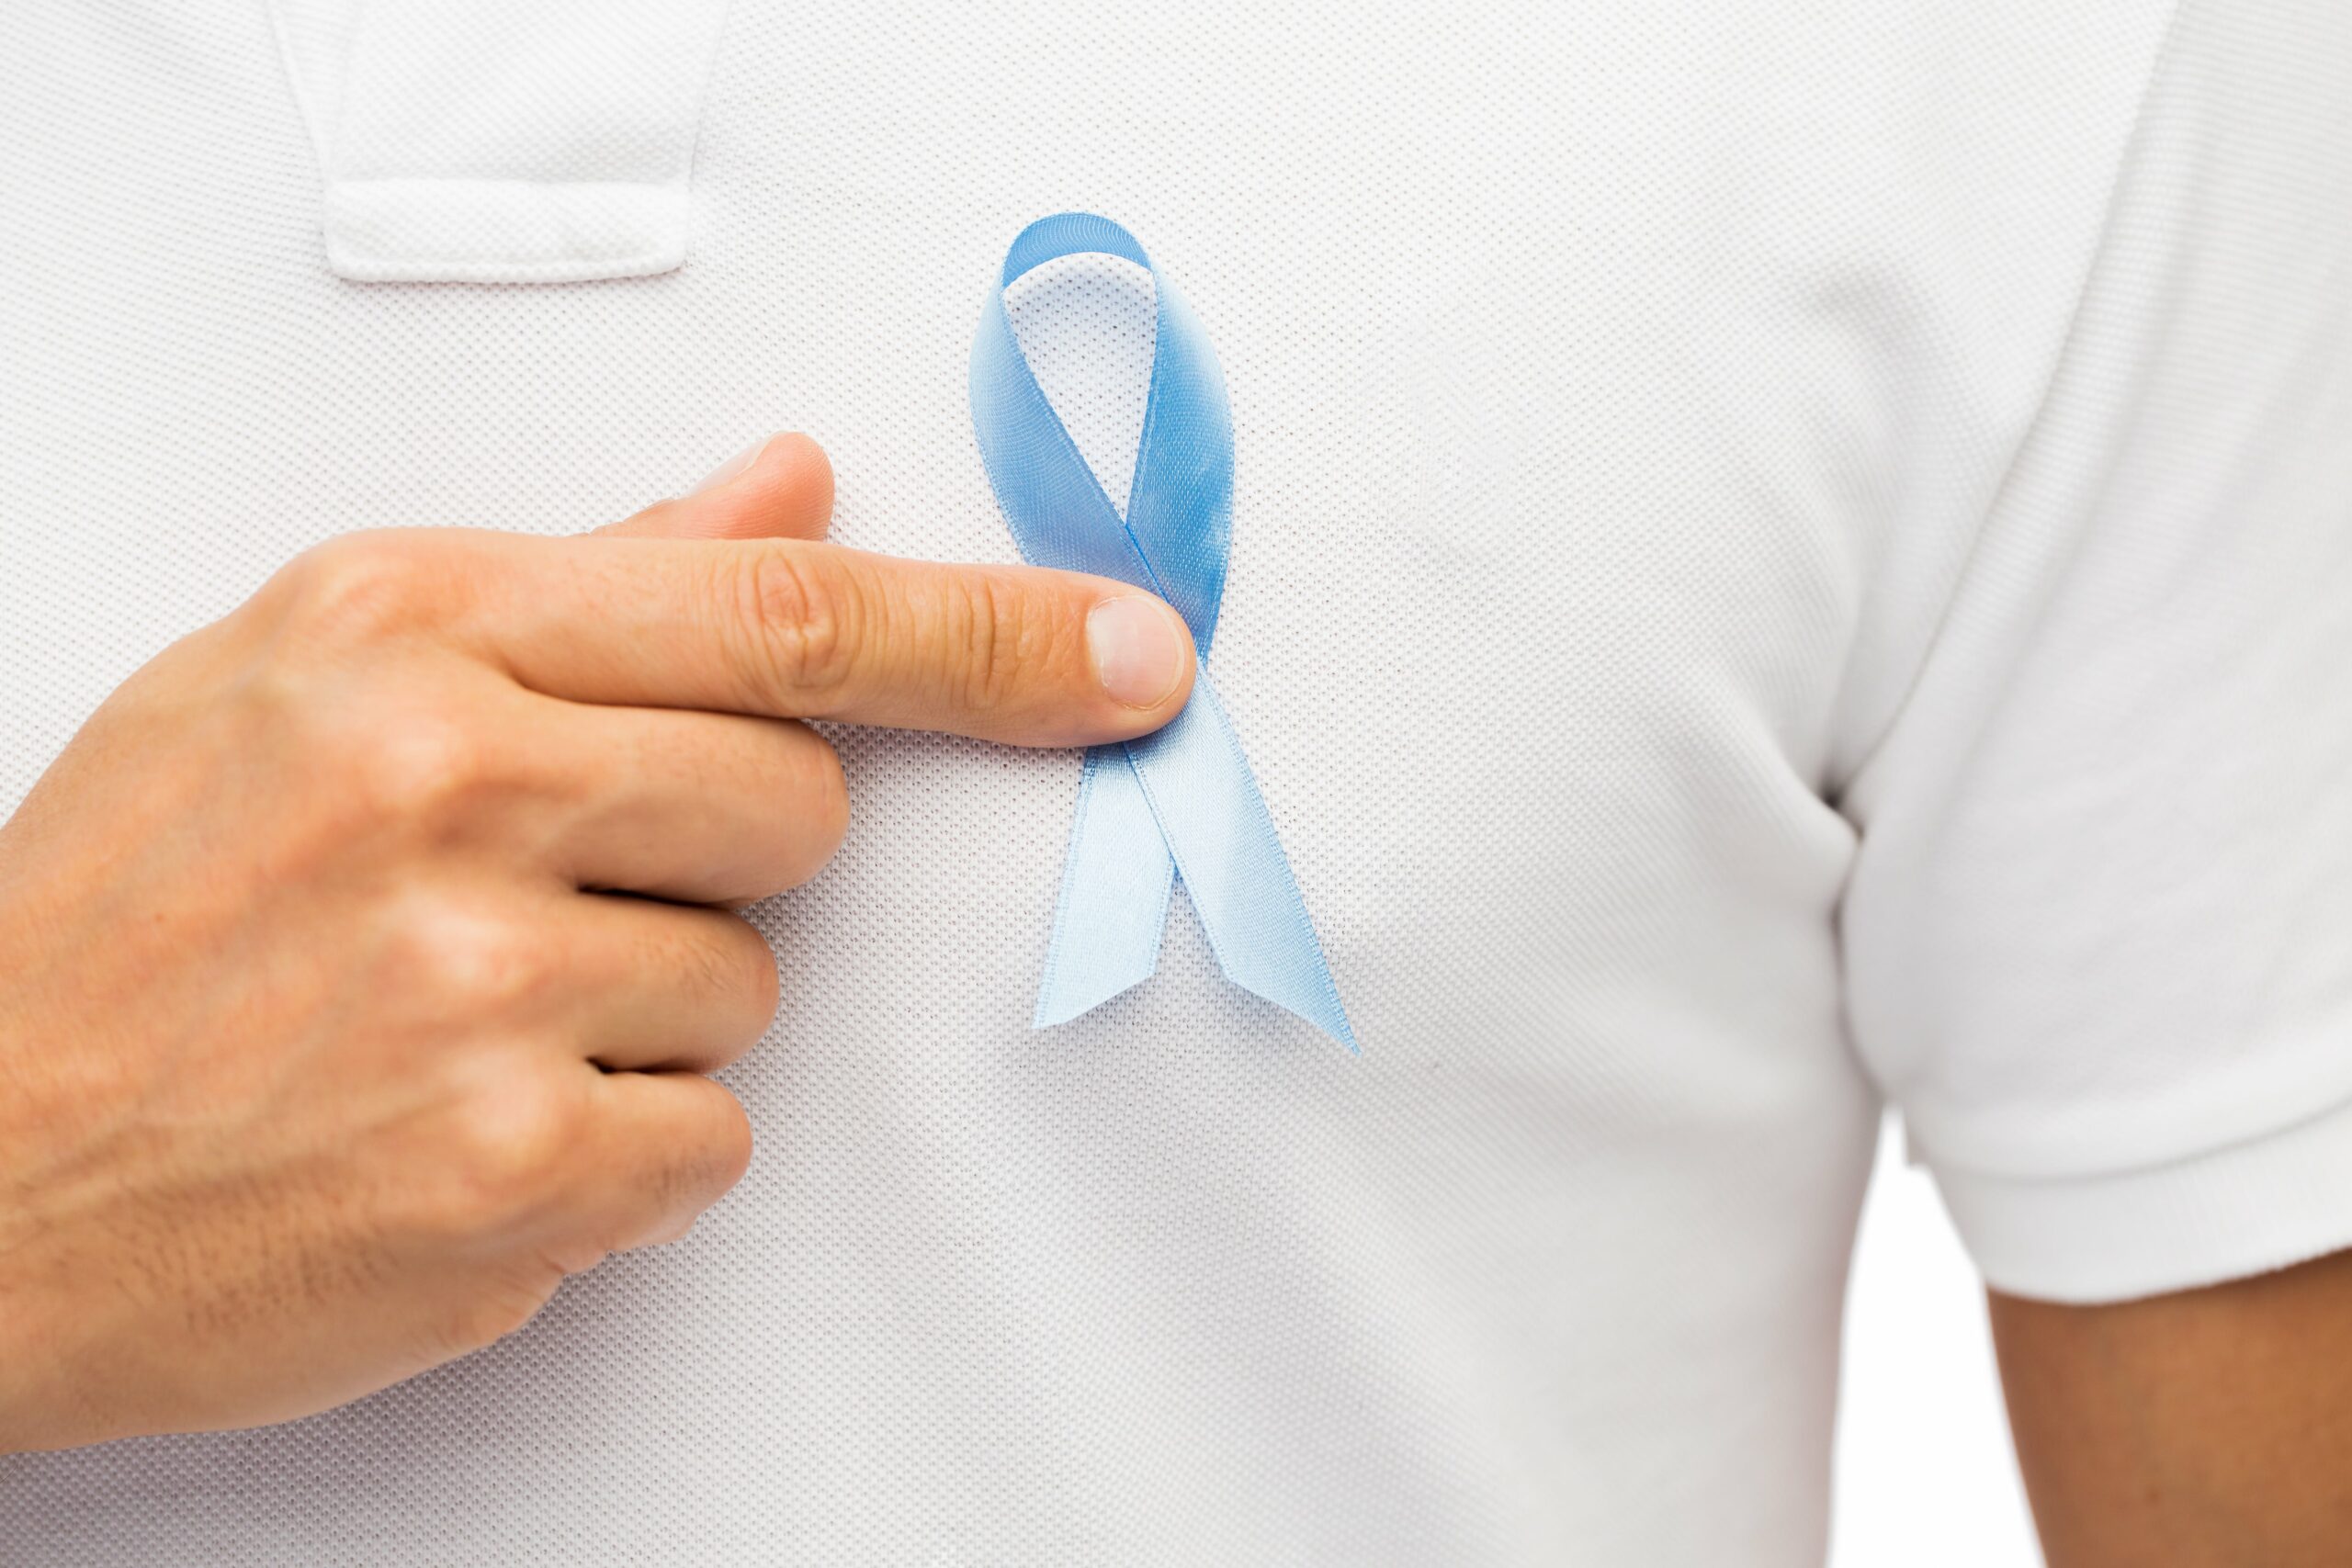 Chemotherapy & Prostate Cancer Appeal | Lingen Davies